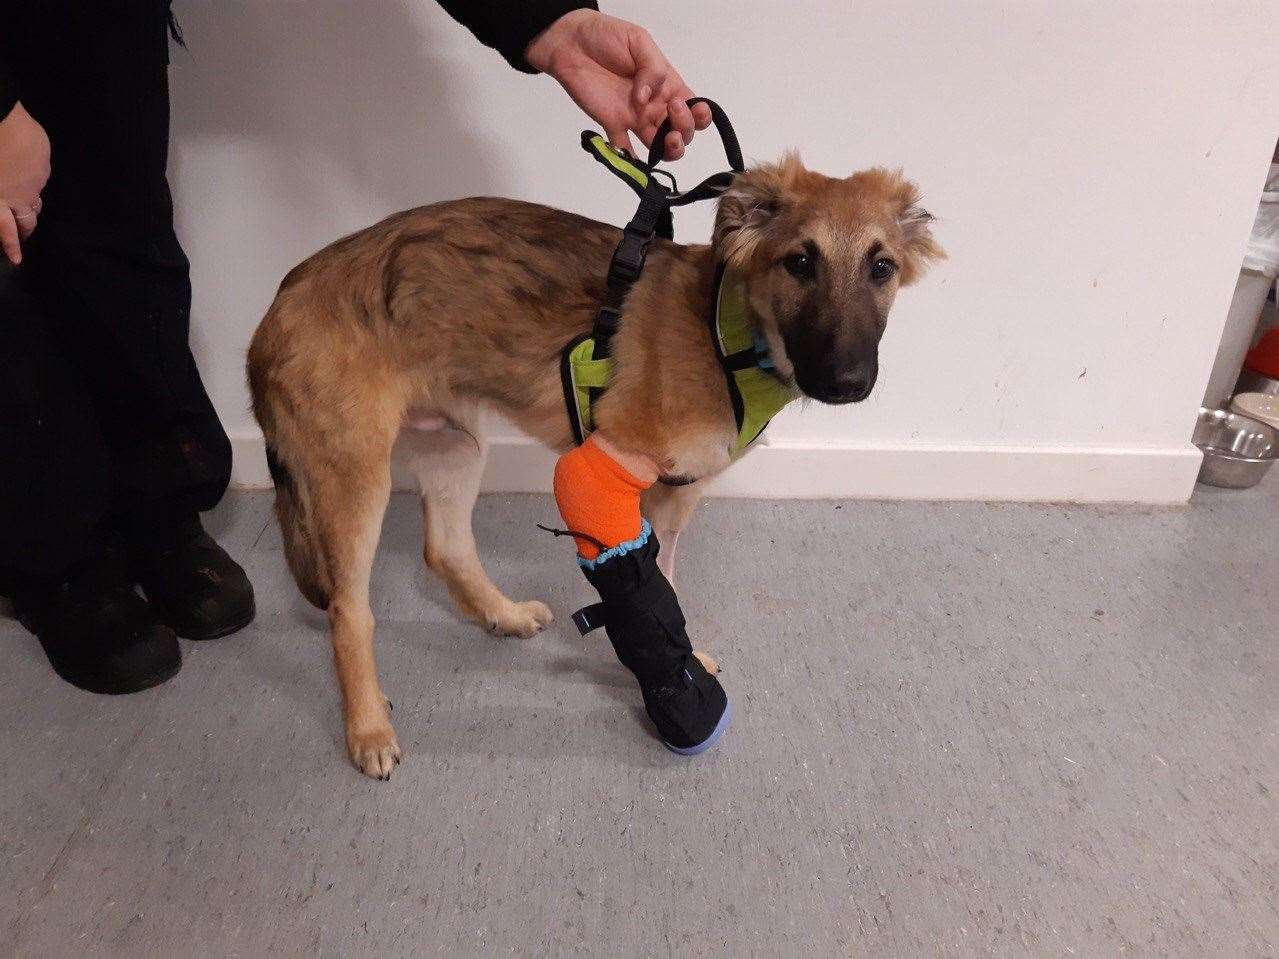 The young dog's leg was fractured after he was hit by a car.